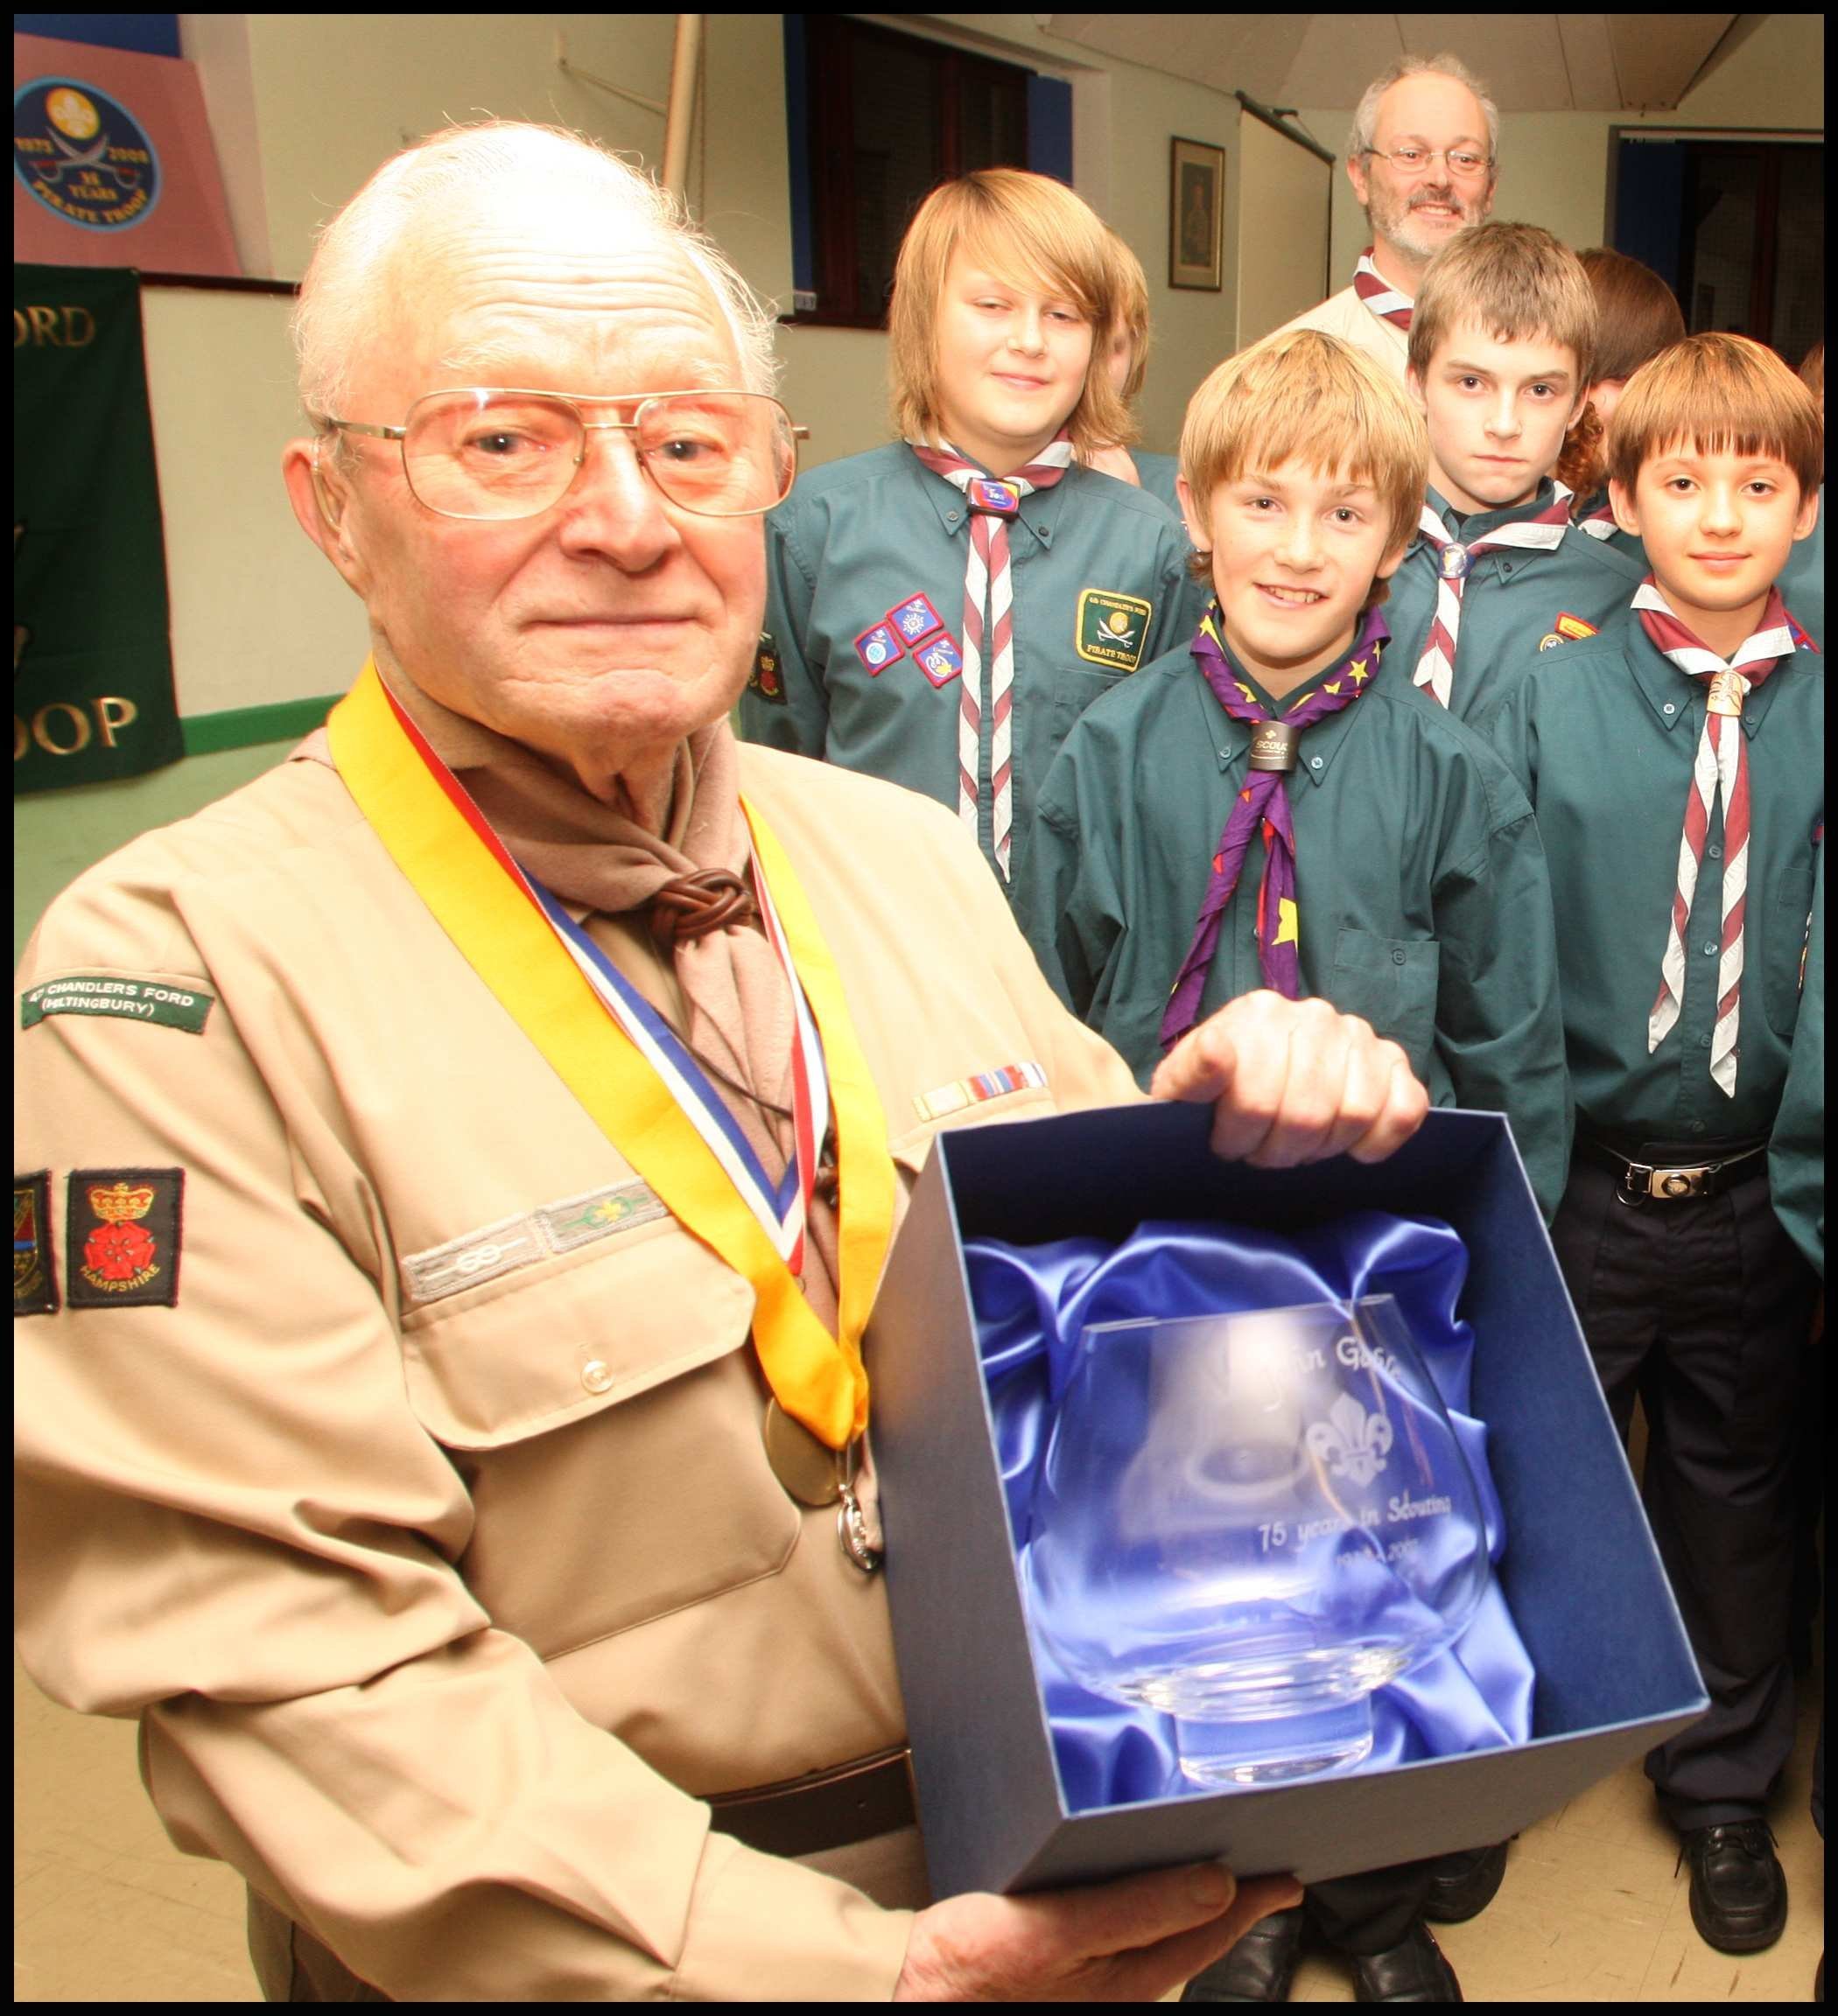 John Golbe 75 years in Scouting recives his award at Chandlers Ford Hiltingbury Scout Group.